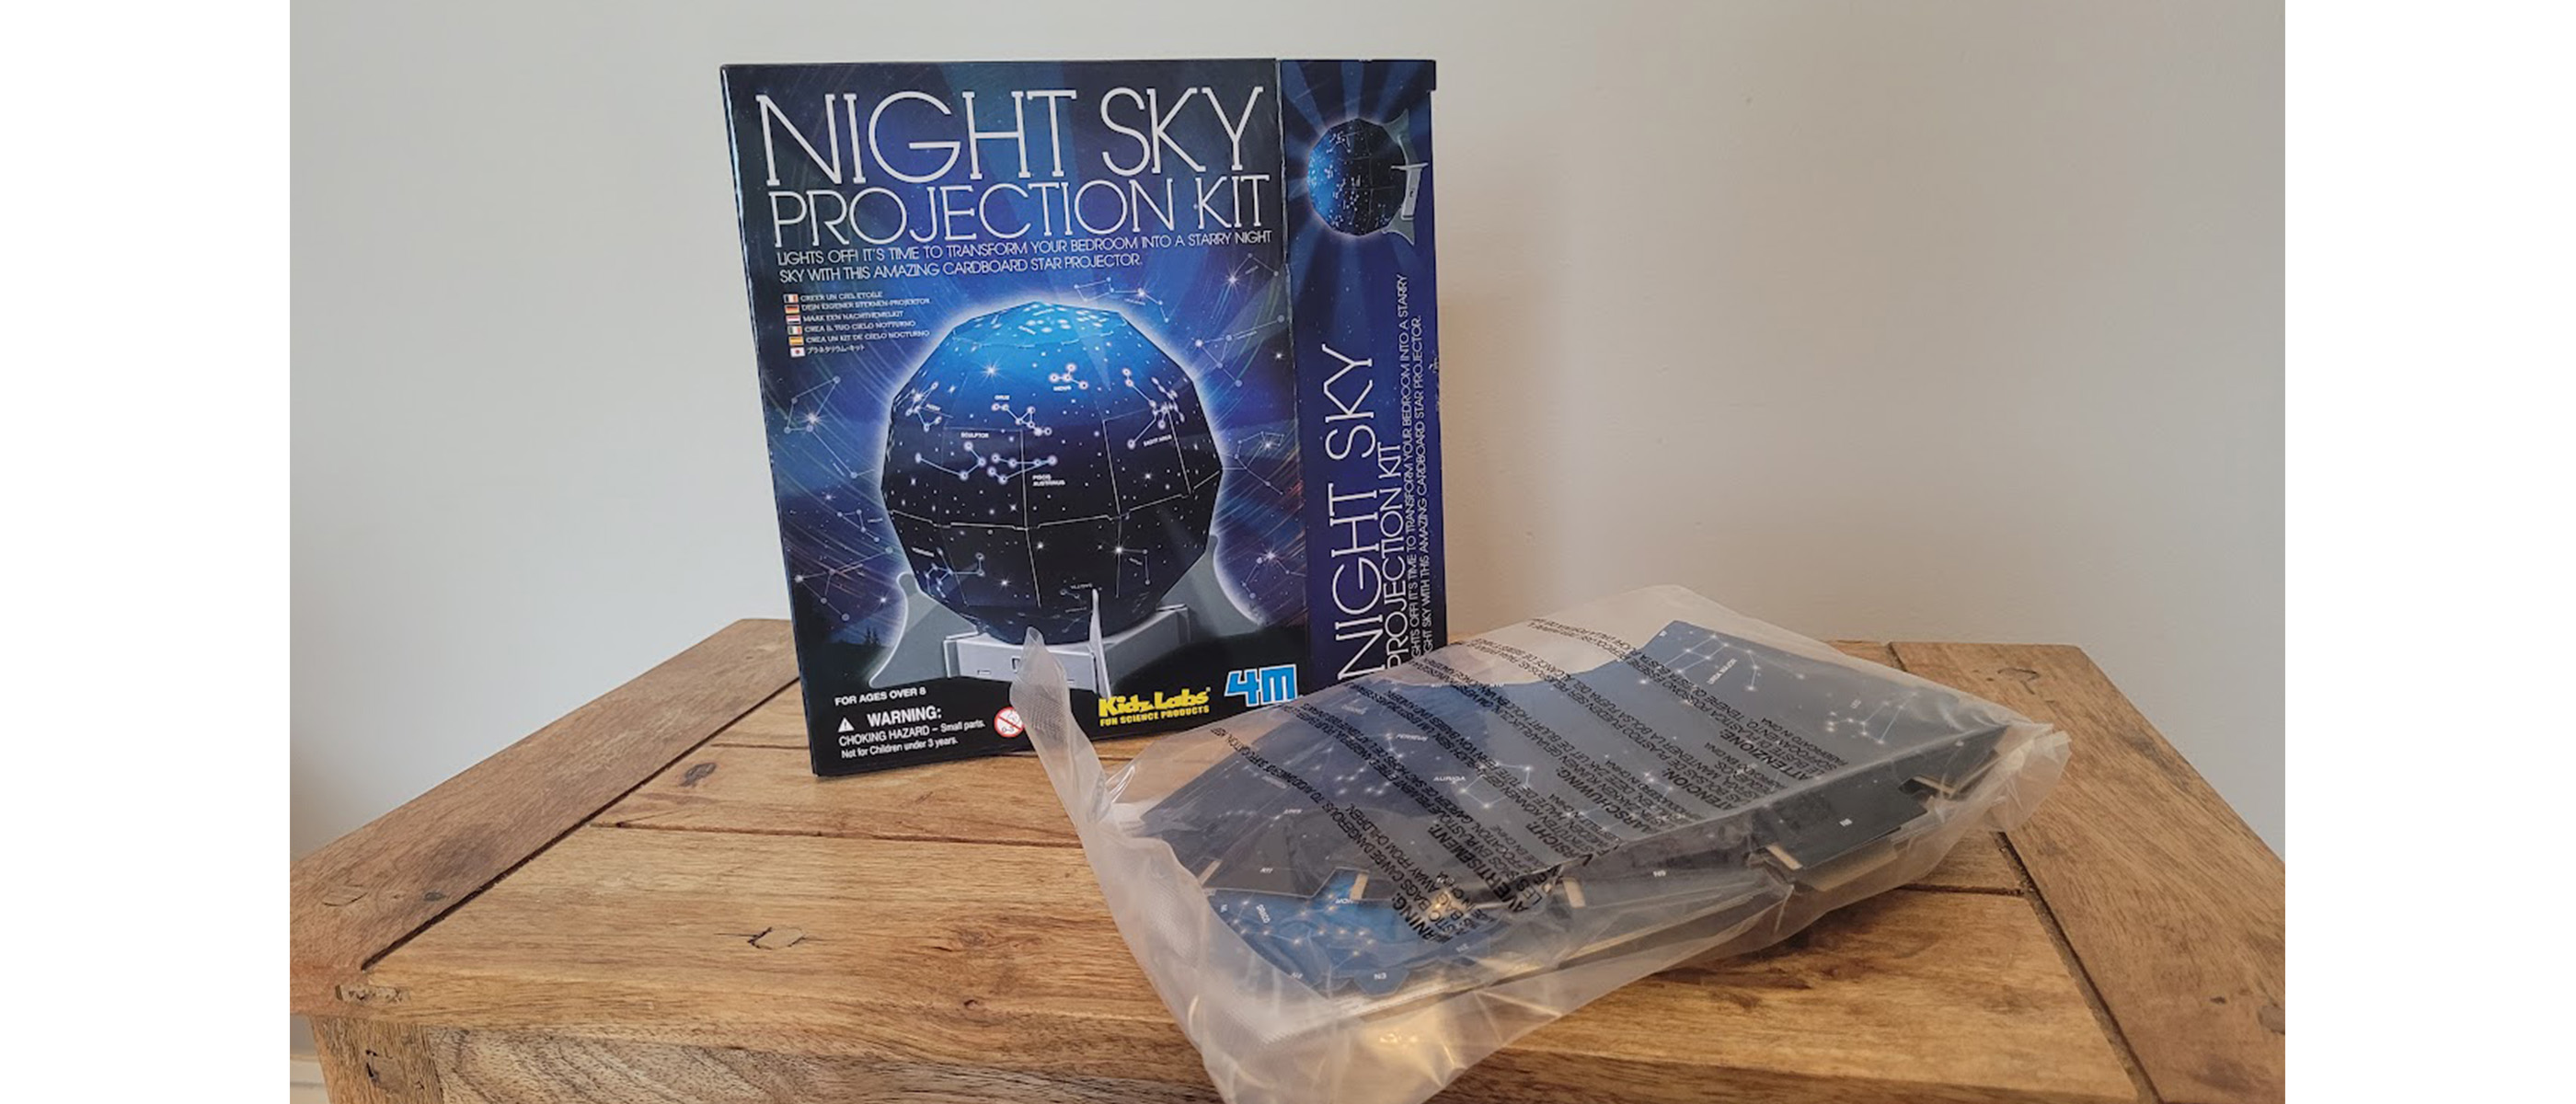 The unboxing of the Create a night sky projection kit